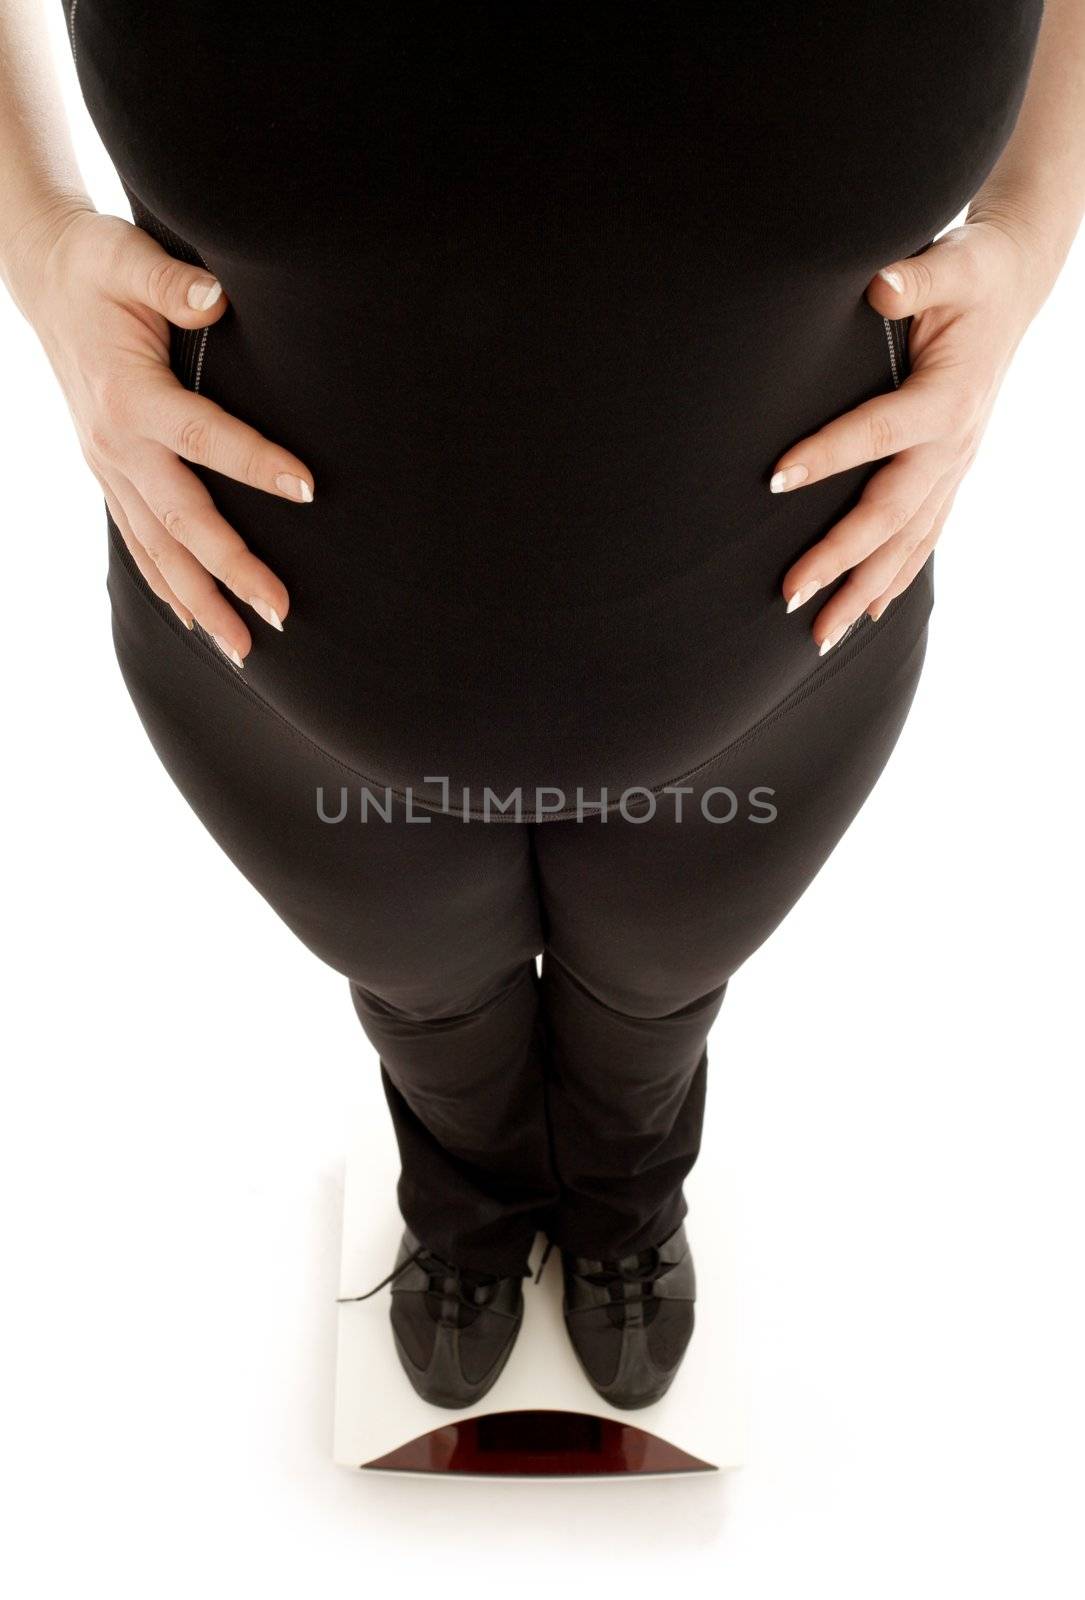 pregnant lady weighing oneself, focus on belly by dolgachov